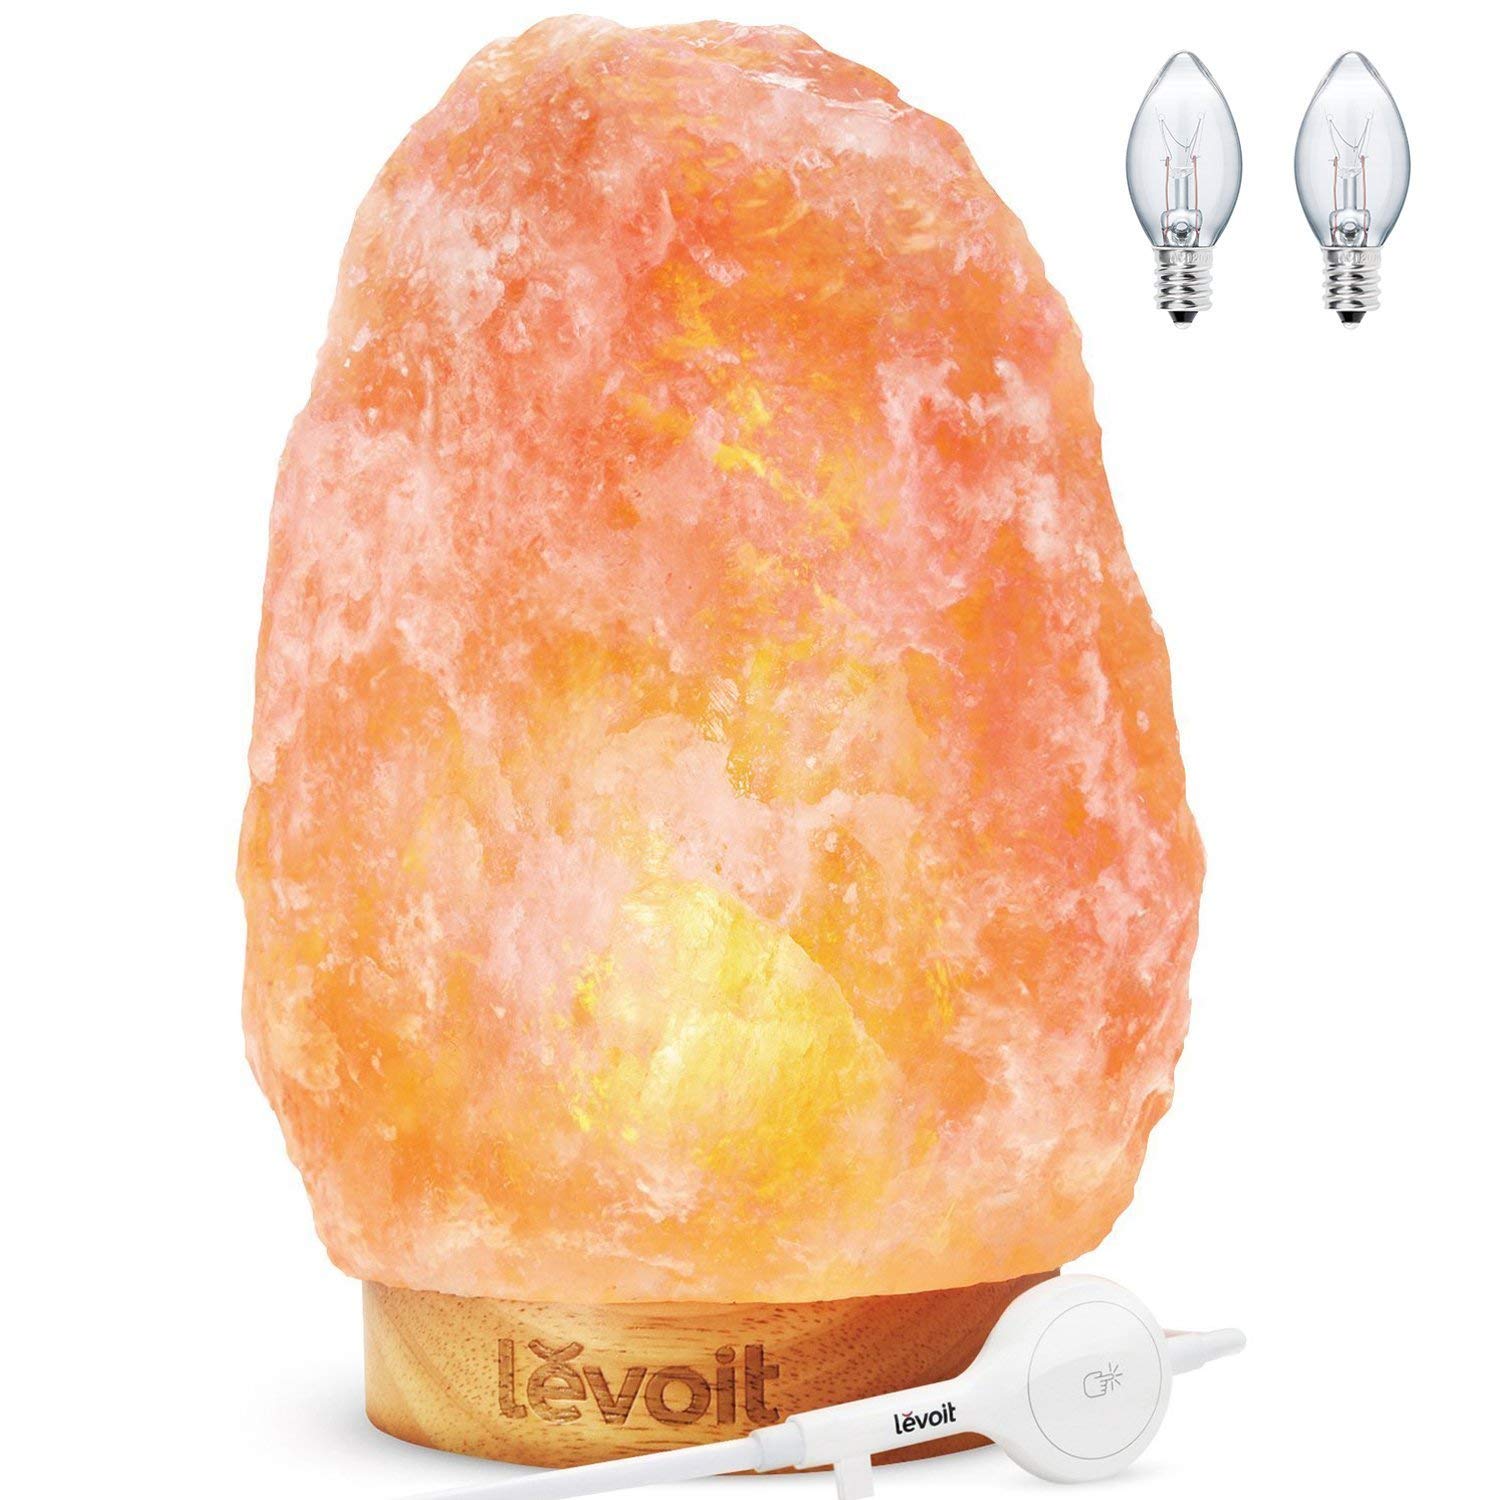 LEVOIT Kana Himalayan Rock Salt Lamp Pink Crystal Hand Carved Hymalain Lamps with Real Rubber Wood Base, Dimmable Touch Switch, Holiday Gift (UL-Listed, 2 Extra Original Bulbs Included)